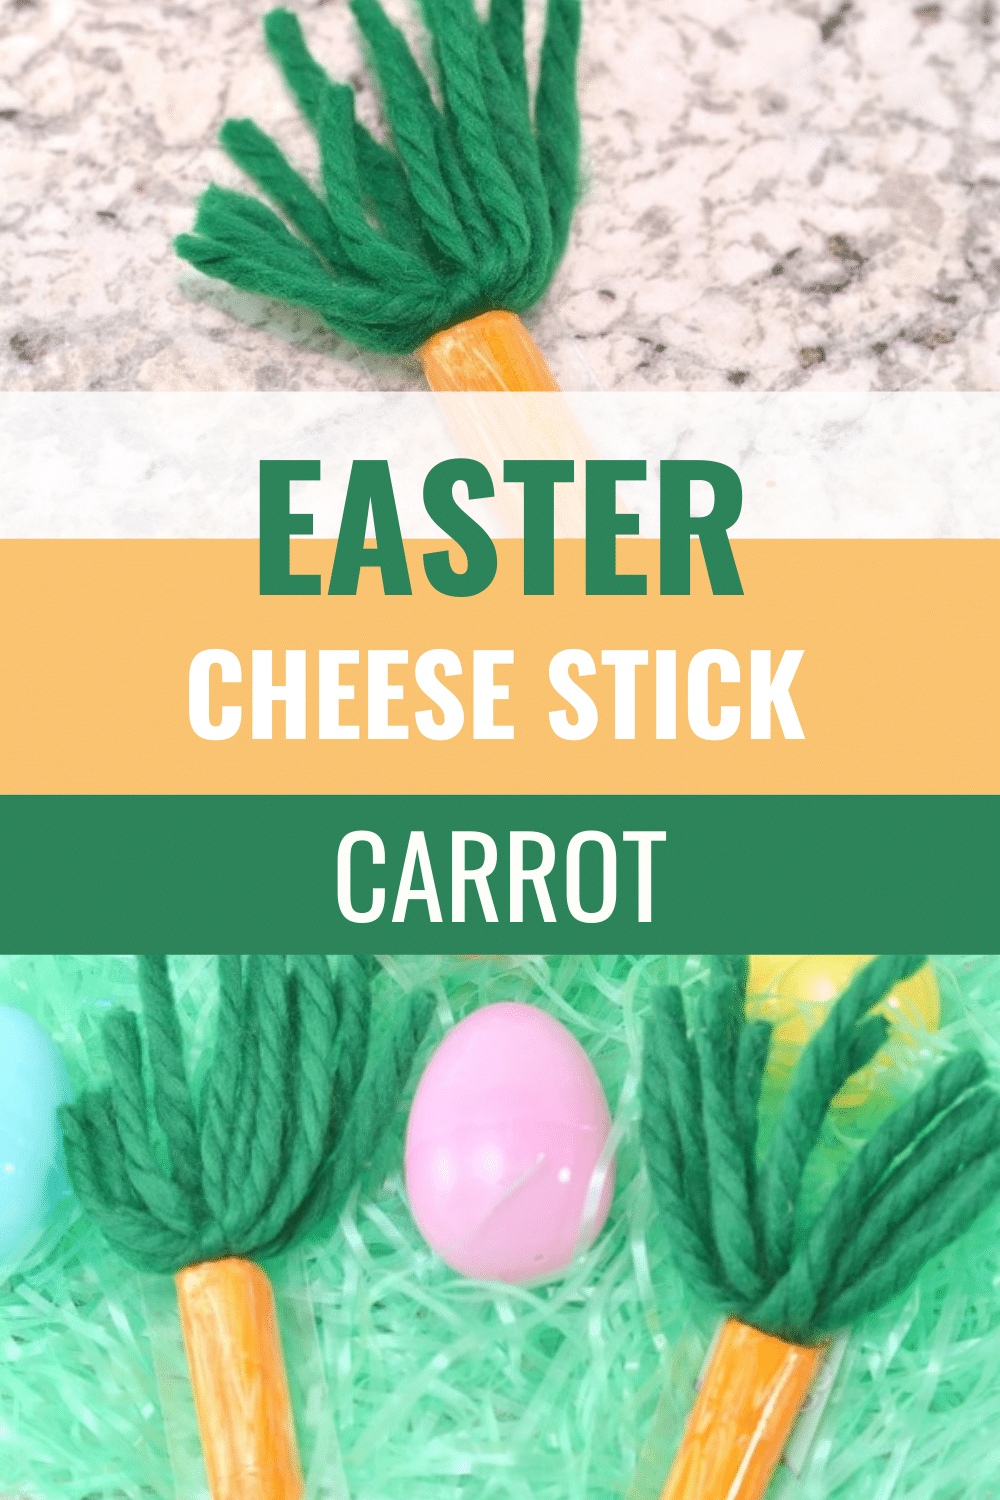 Snack time doesn't have to be boring! This cheese stick carrot is the perfect way to make snack time fun during the Easter season. #easter #funfoodforkids #snacks #easycrafts via @wondermomwannab